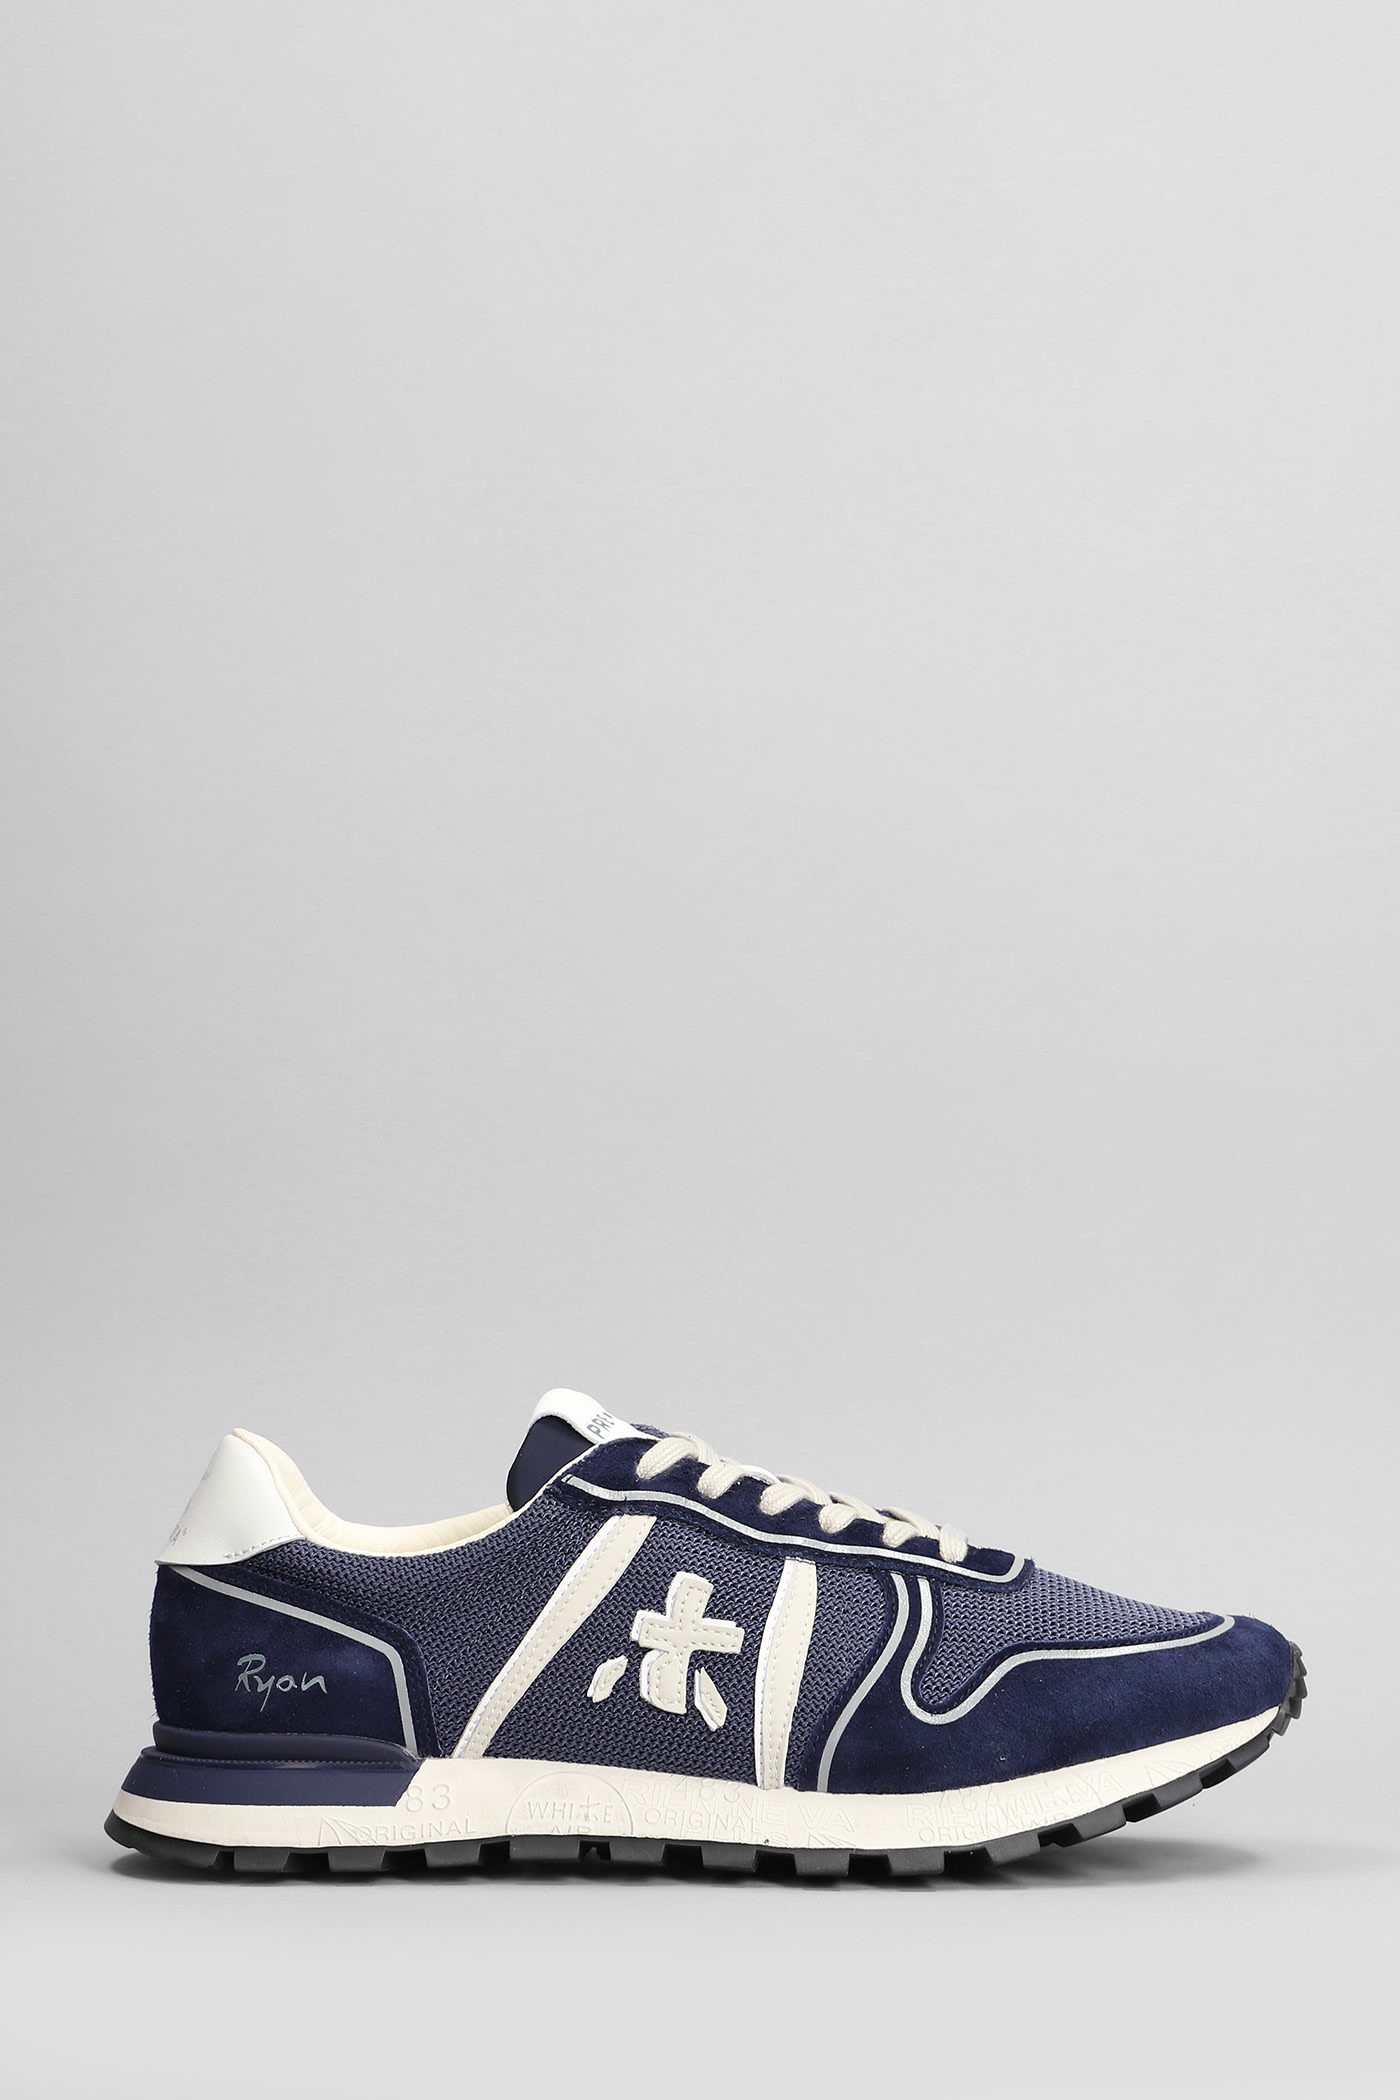 Ryan Sneakers In Blue Suede And Fabric